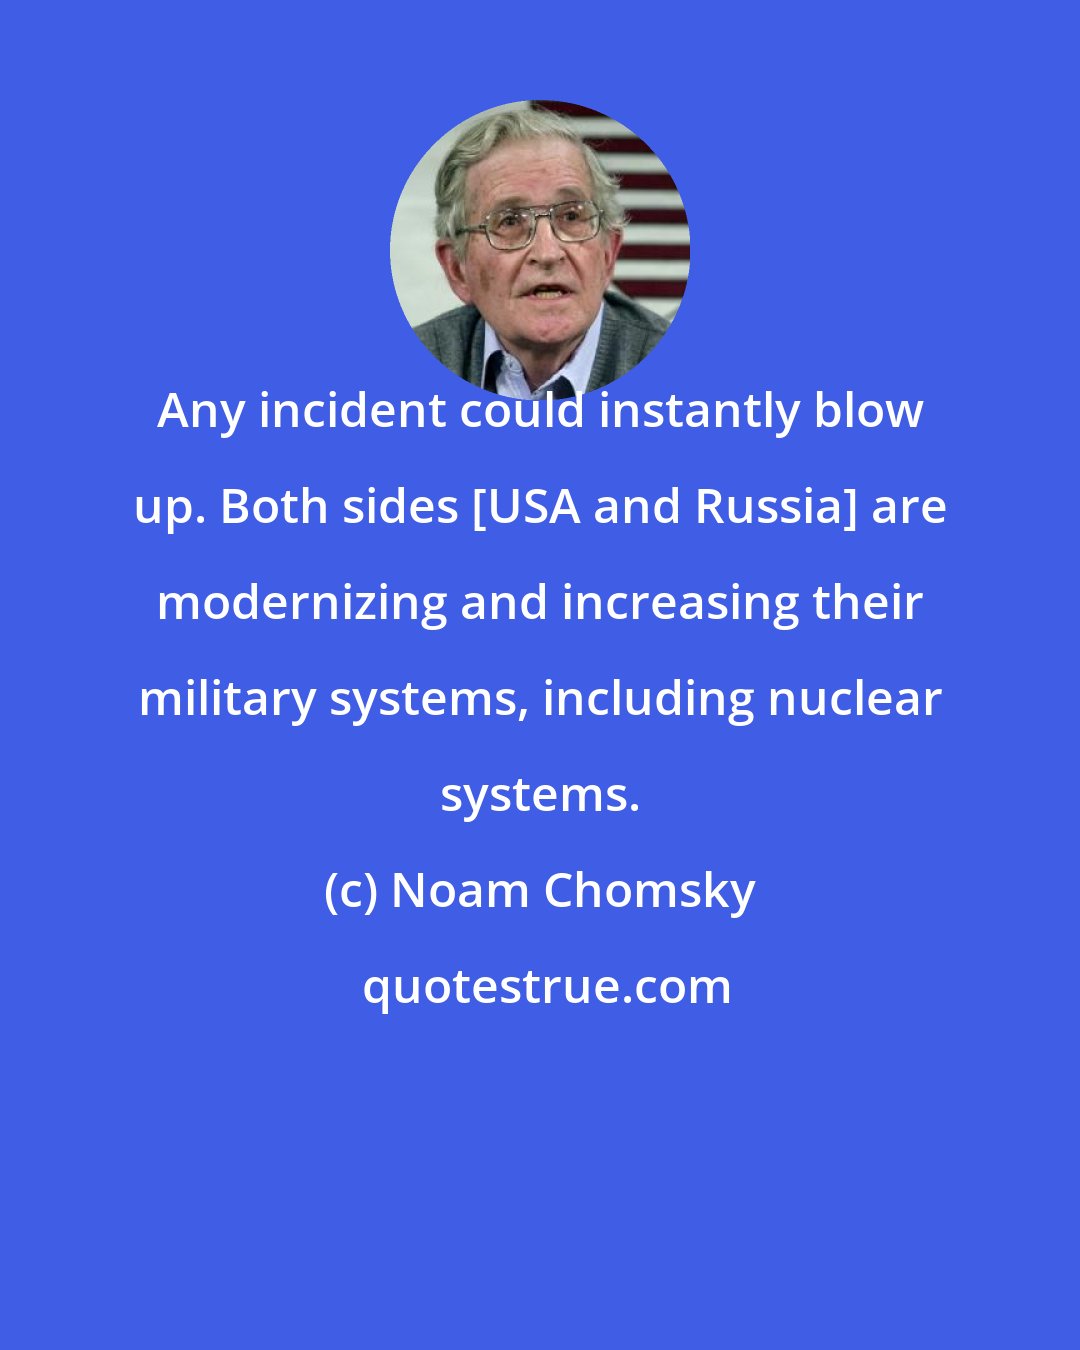 Noam Chomsky: Any incident could instantly blow up. Both sides [USA and Russia] are modernizing and increasing their military systems, including nuclear systems.